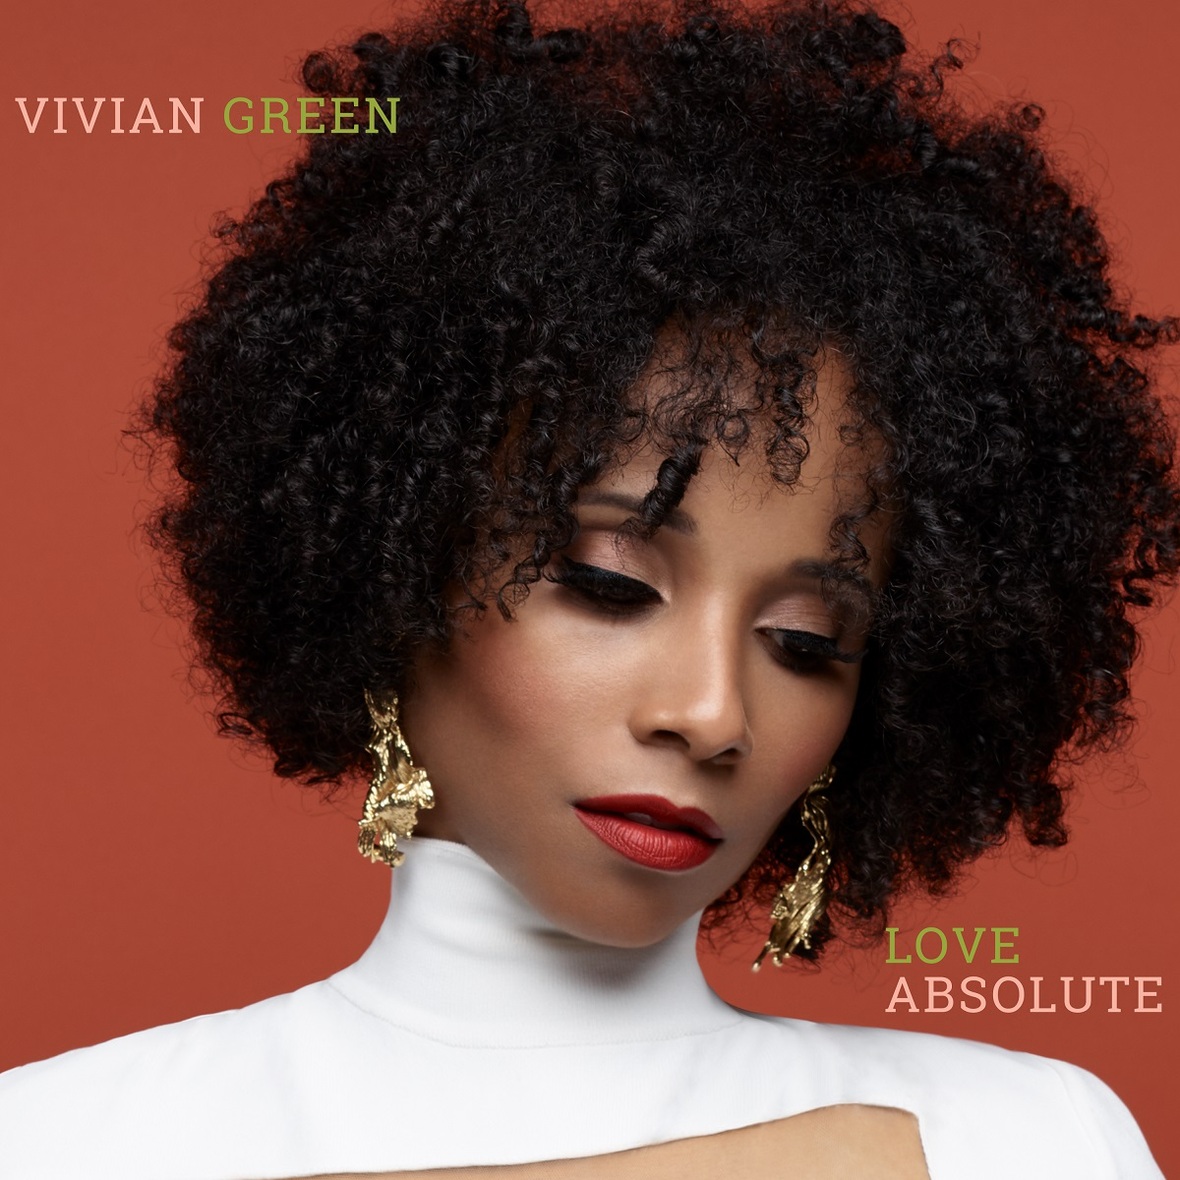 Vivian Green Announces Upcoming Album "Love Absolute" + Releases New Song "You Send Me"